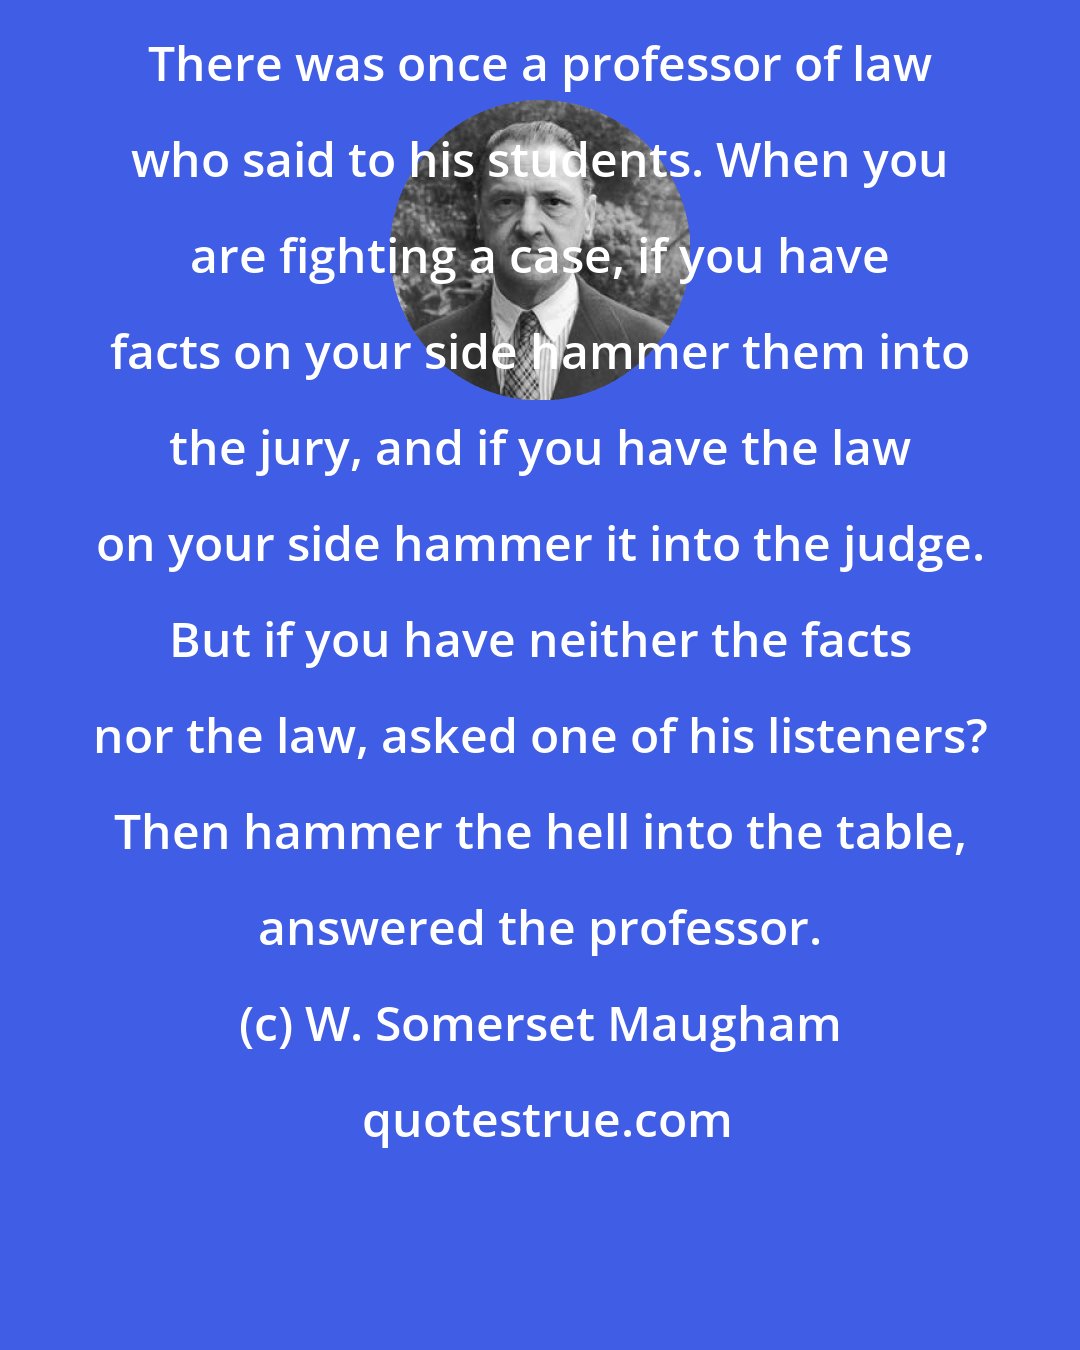 W. Somerset Maugham: There was once a professor of law who said to his students. When you are fighting a case, if you have facts on your side hammer them into the jury, and if you have the law on your side hammer it into the judge. But if you have neither the facts nor the law, asked one of his listeners? Then hammer the hell into the table, answered the professor.